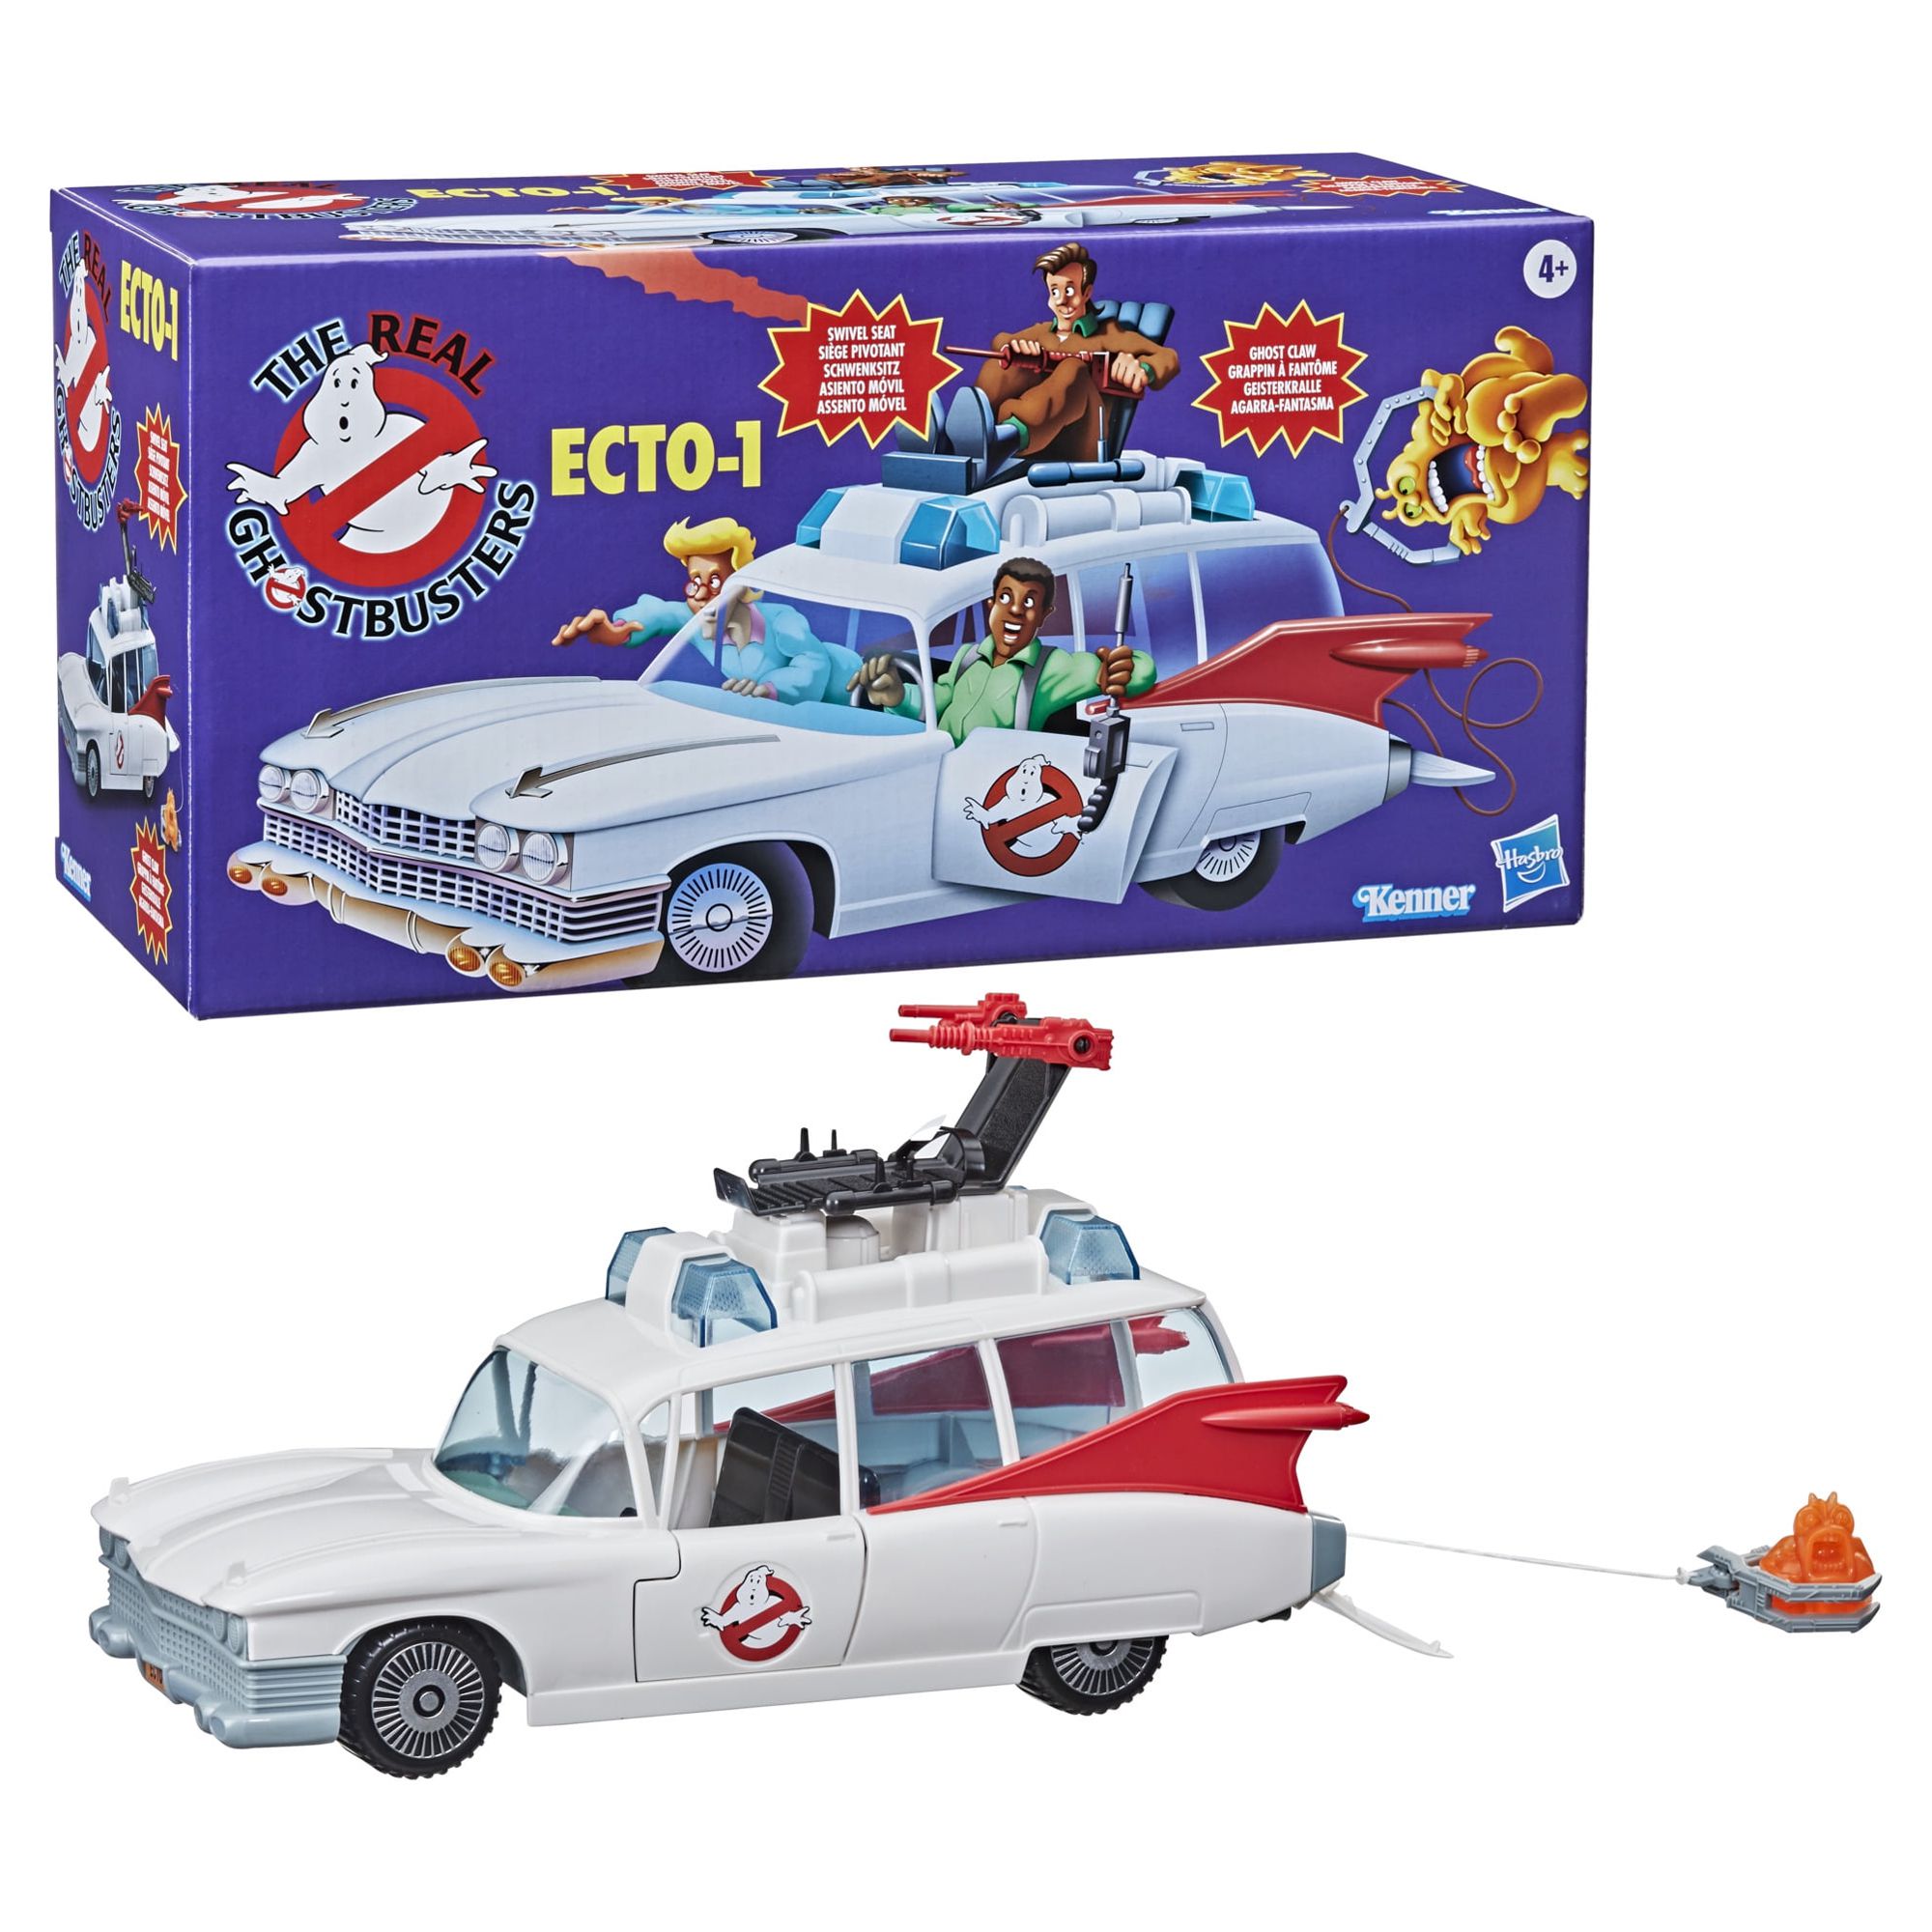 Ghostbusters Kenner Classics the Real Ghostbusters Ecto-1 Retro Vehicle - image 5 of 6